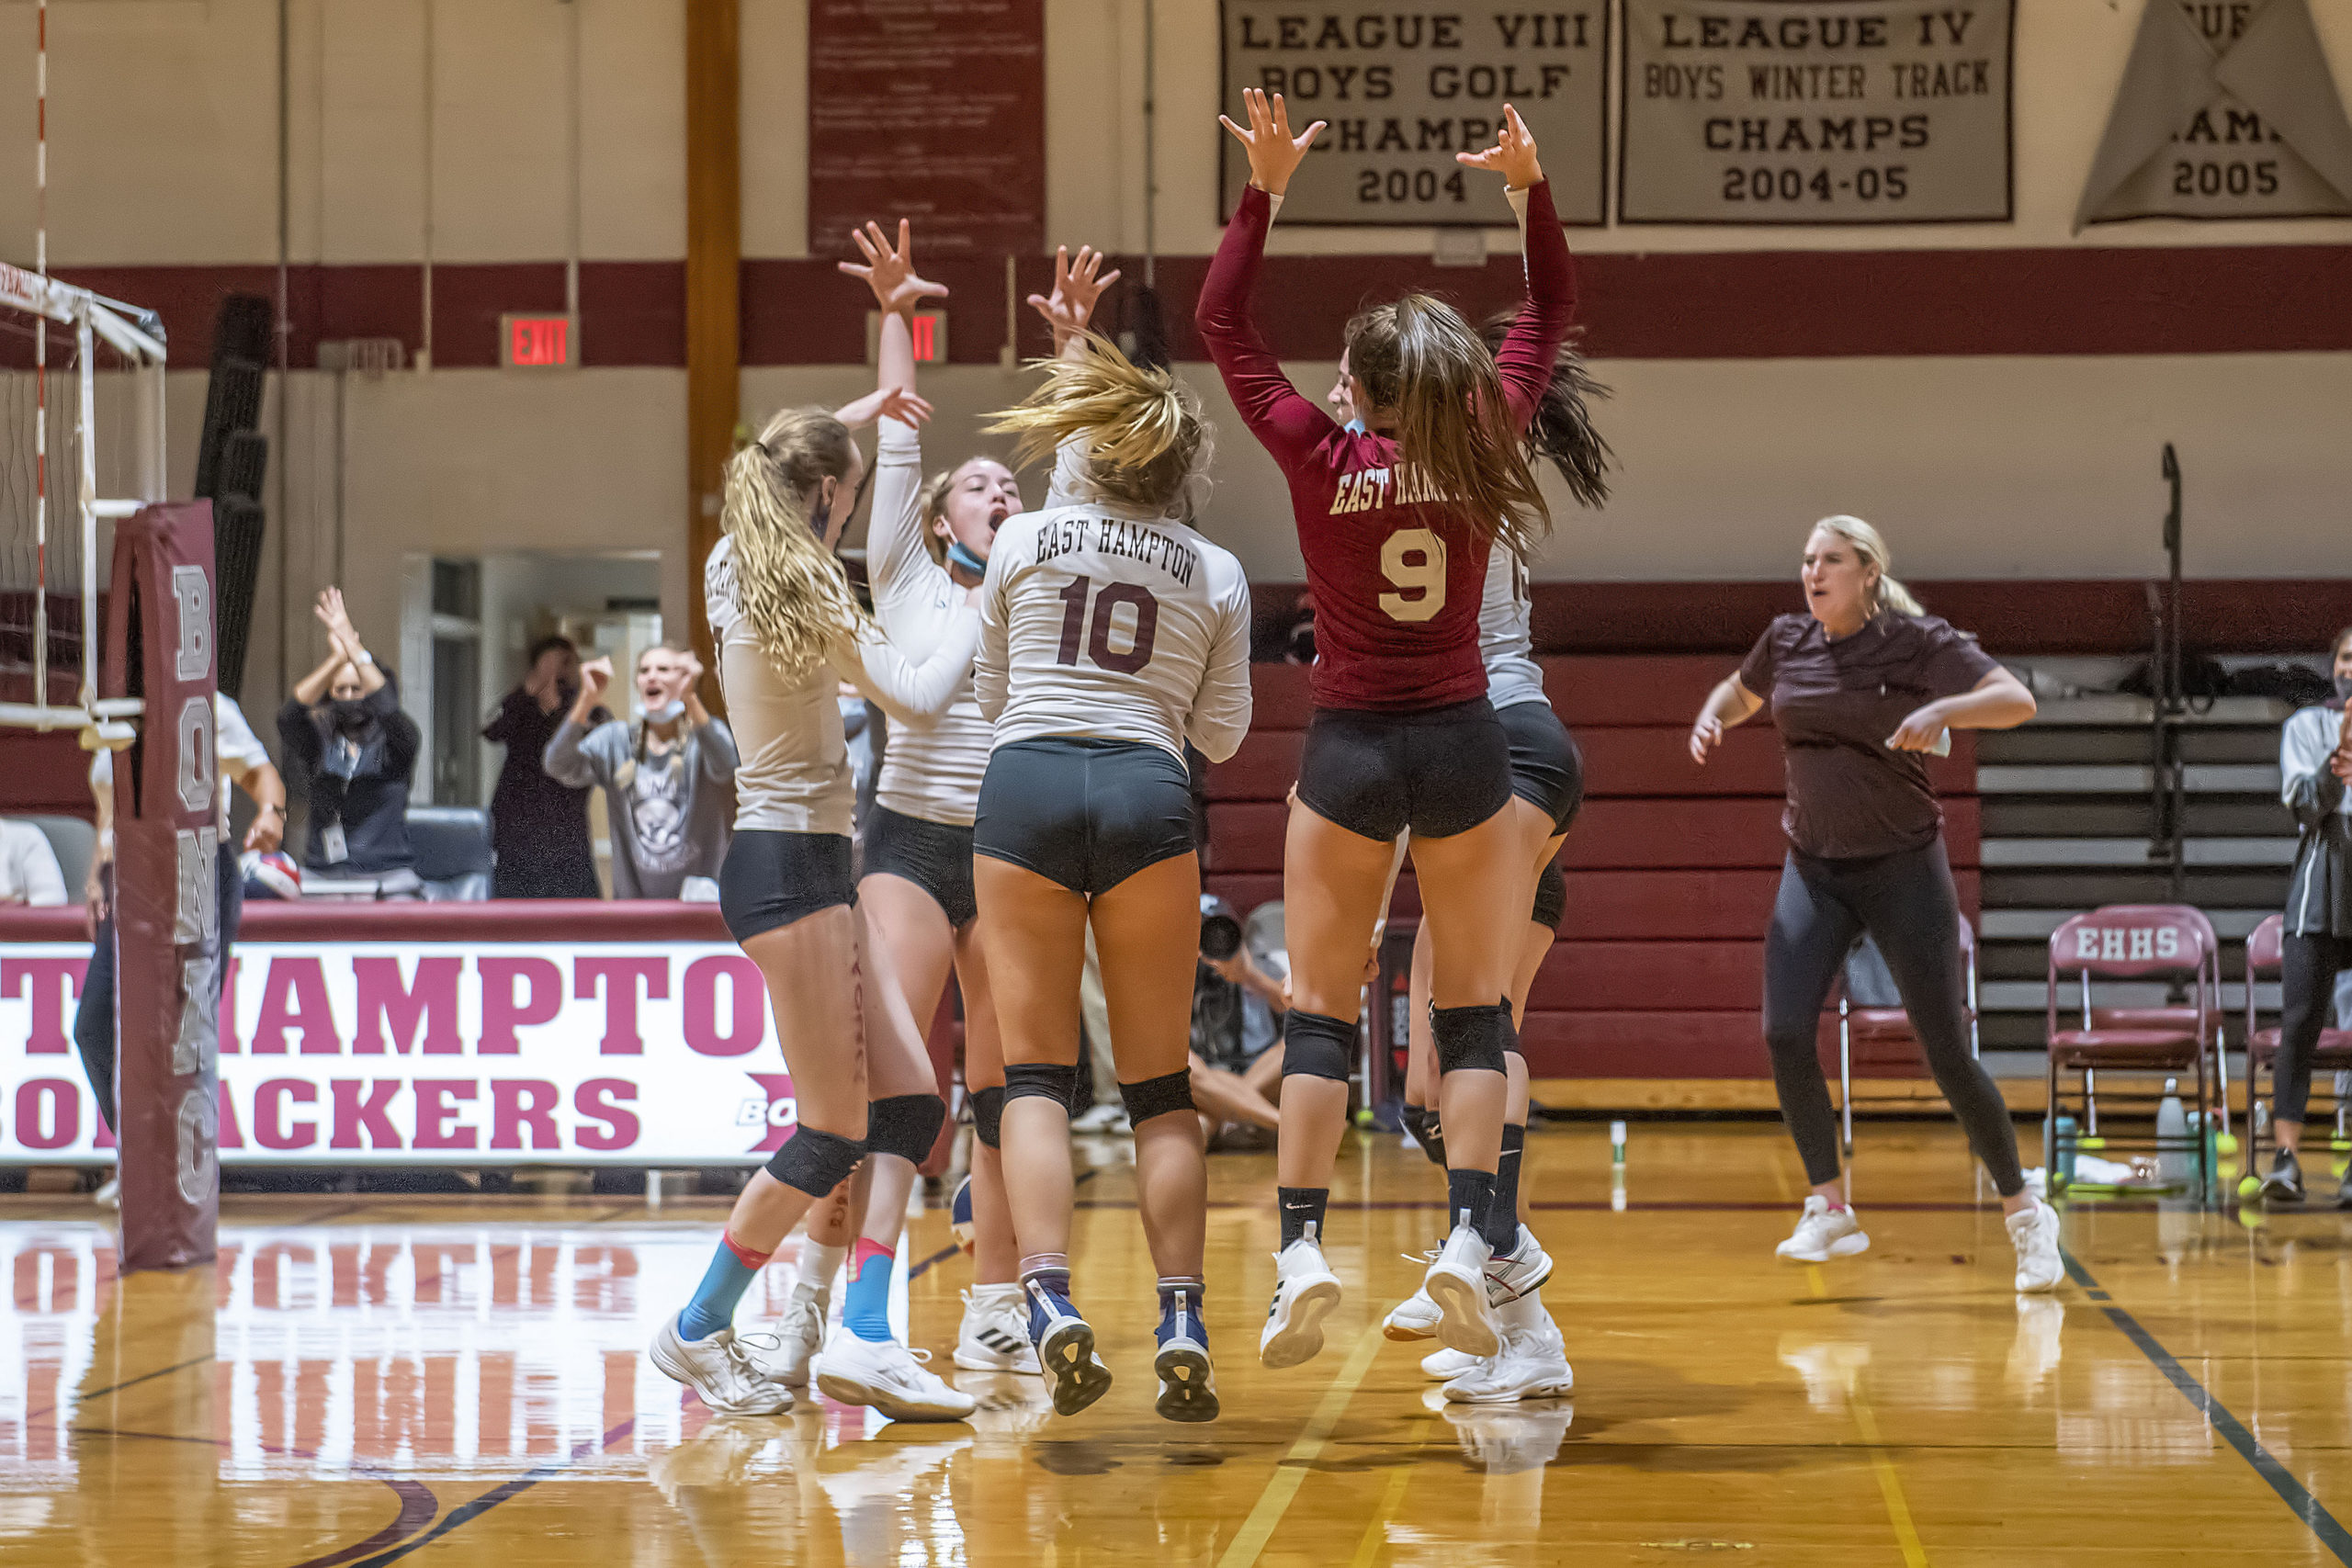 The Bonackers react to their come-from-behind win over Mount Sinai on Wednesday, October 20, that sealed a playoff spot for them.